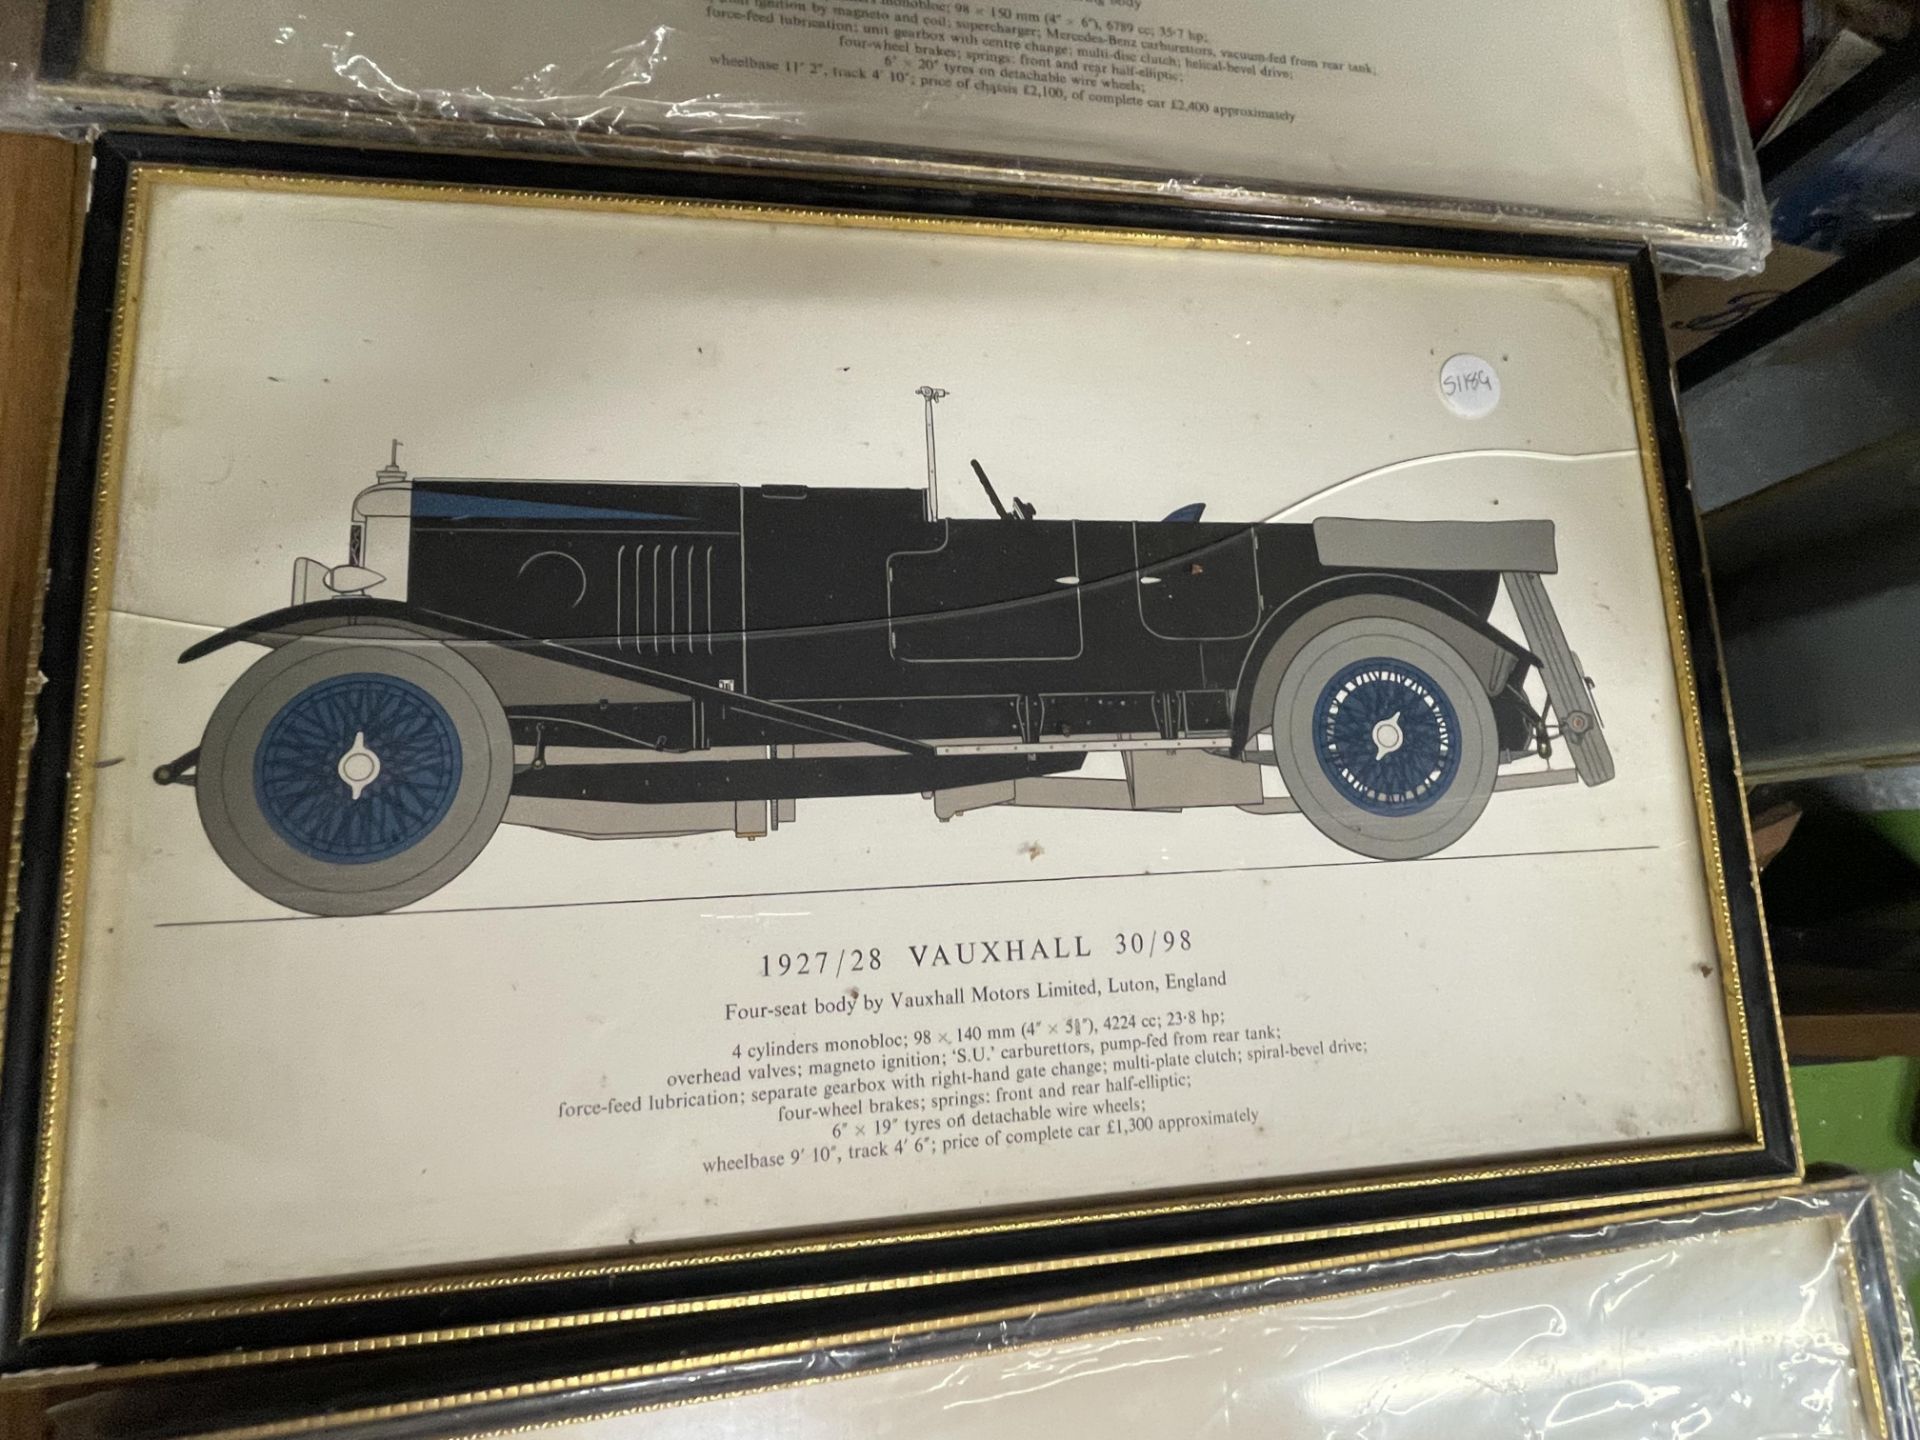 THREE FRAMED PRINTS OF VINTAGE CARS - 1926 BENTLEY 3 LITRE', 1927/28 VAUXHALL 30/98' AND '1928 - Image 3 of 4